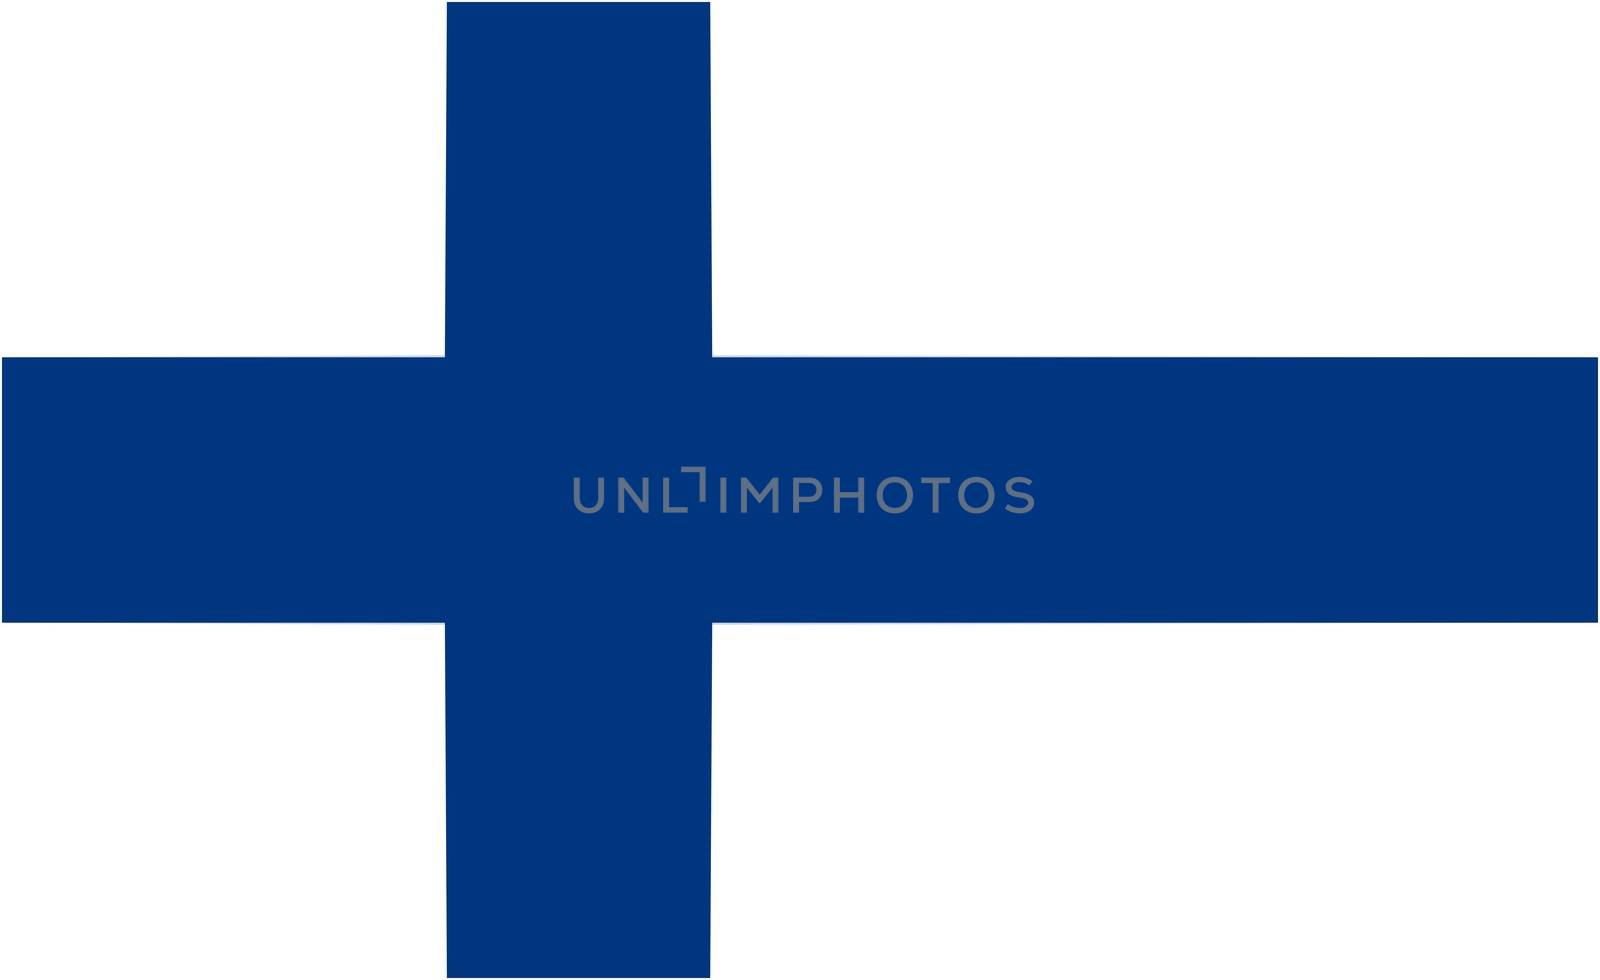 Finland flag by paolo77